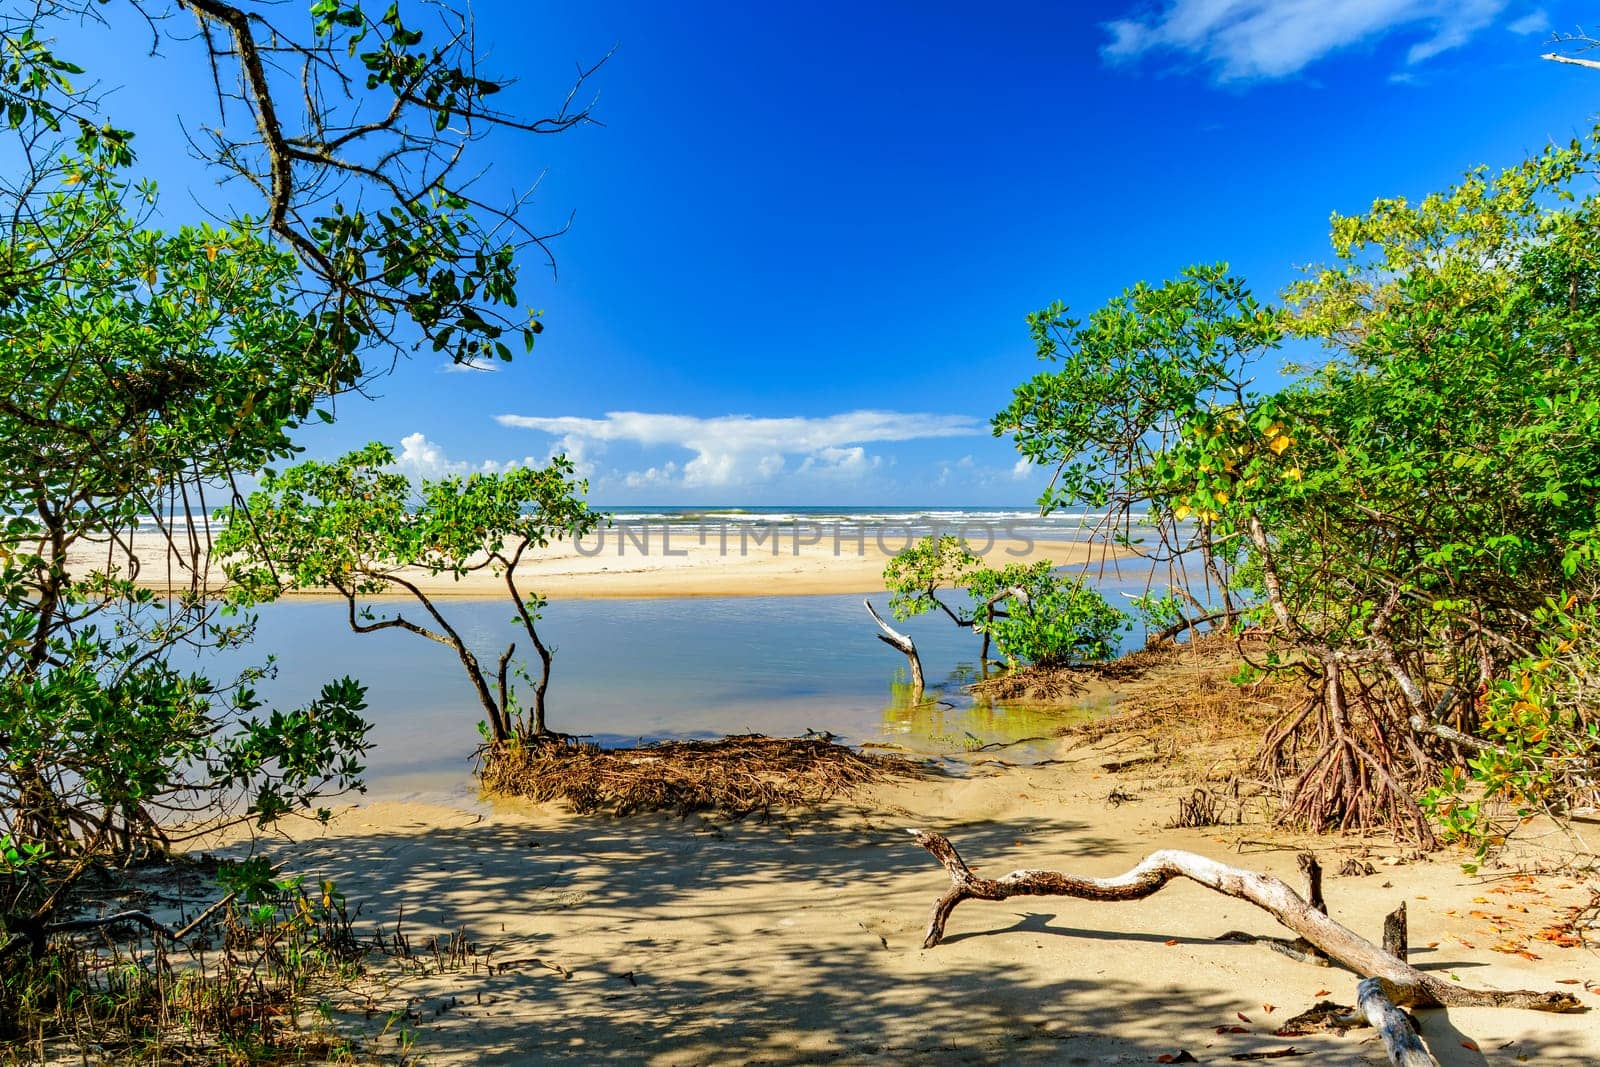 Meeting between the mangrove, the river, the sand and the sea by Fred_Pinheiro